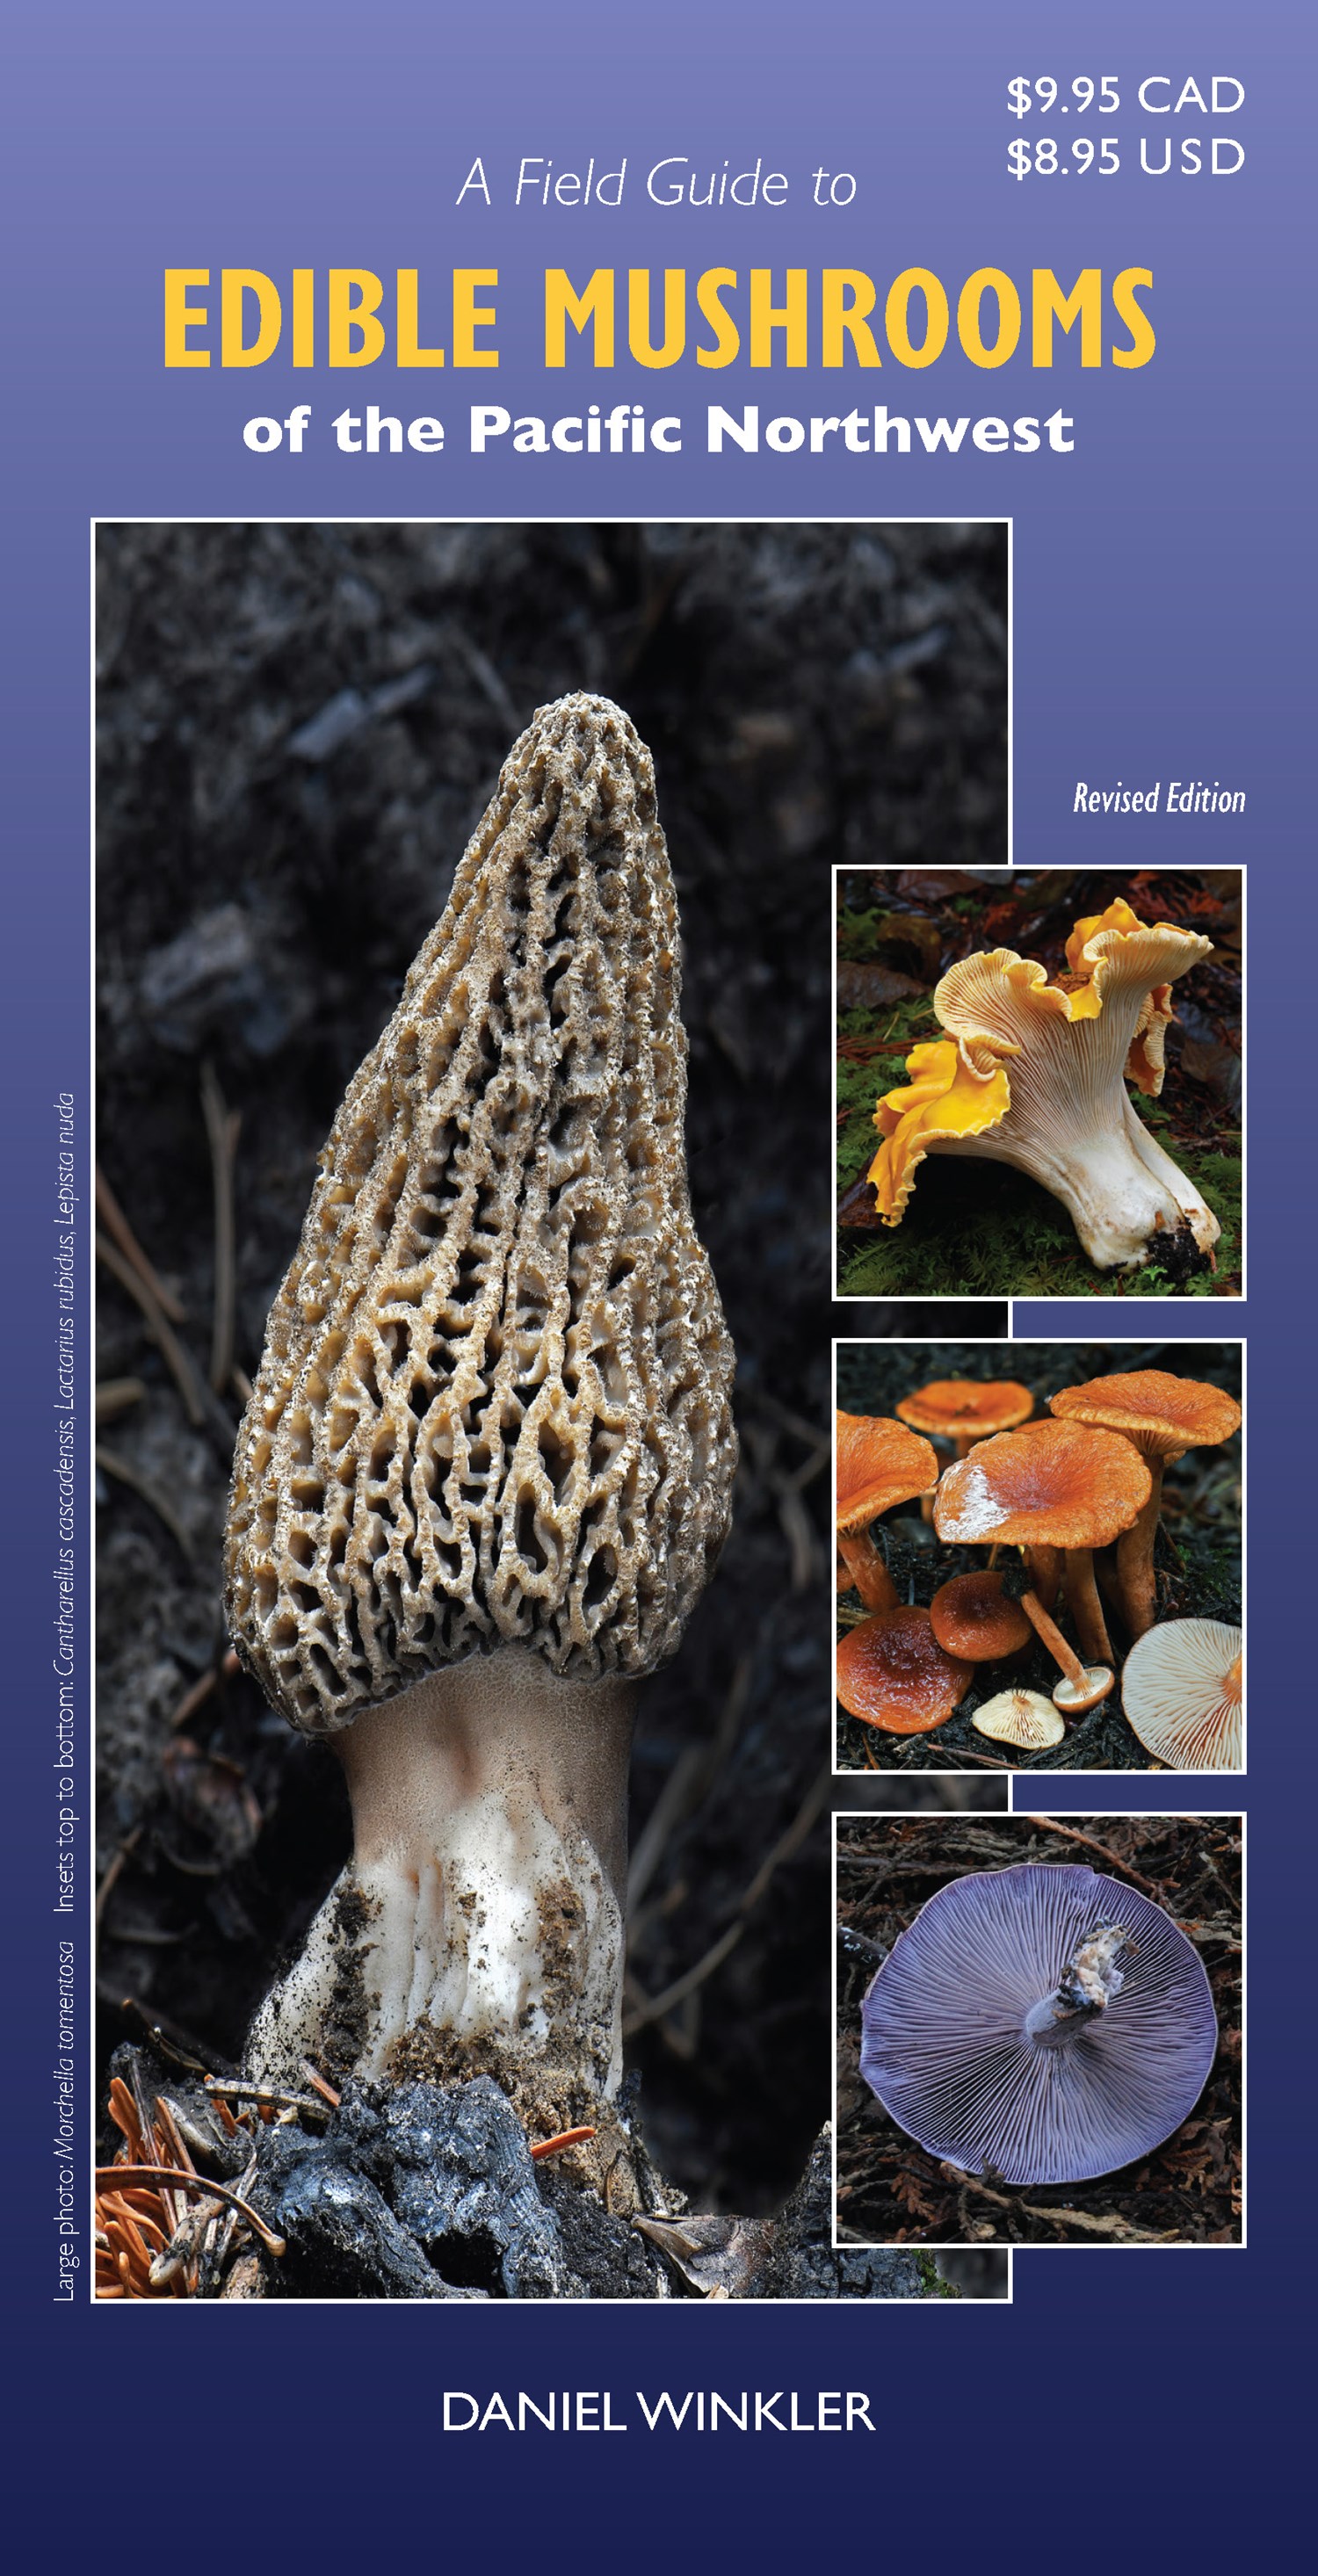 Field Guide to Edible Mushrooms of the Pacific Northwest, A